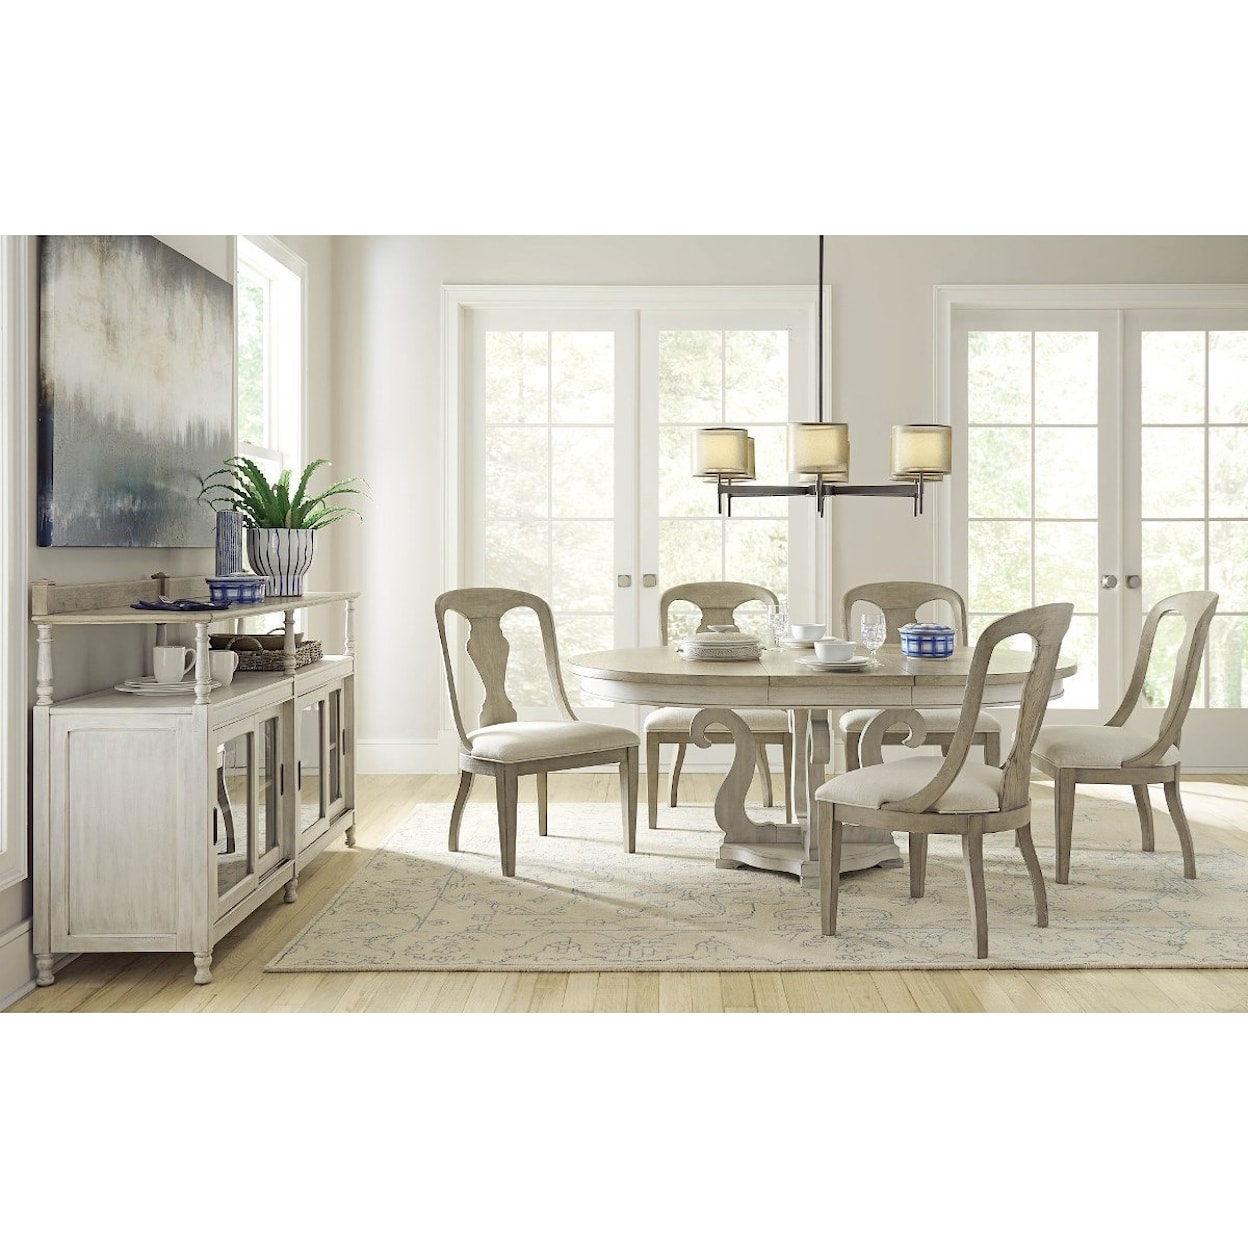 American Drew Litchfield 750 Formal Dining Room Group